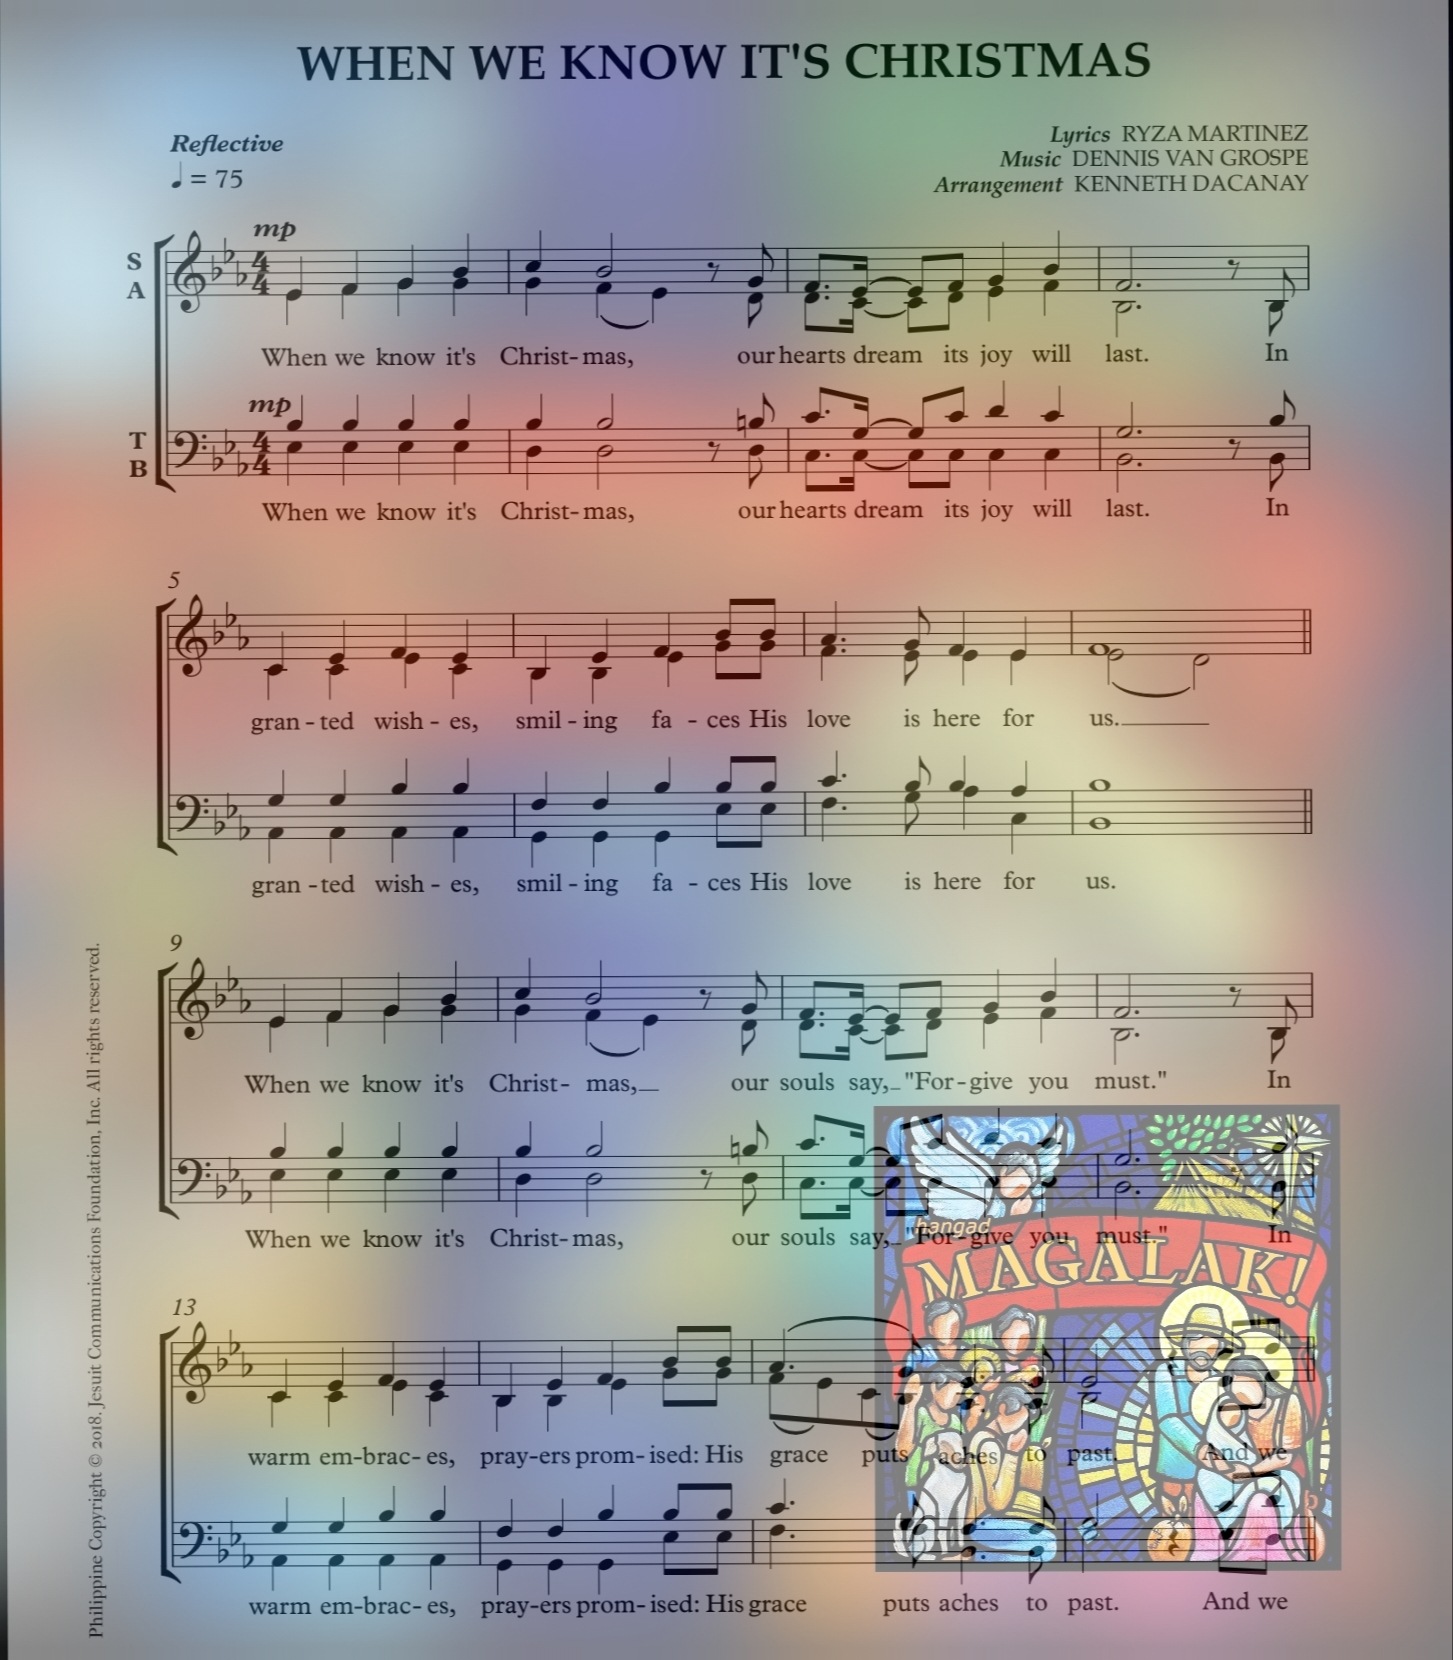 WHEN WE KNOW IT’S CHRISTMAS – Music Sheet